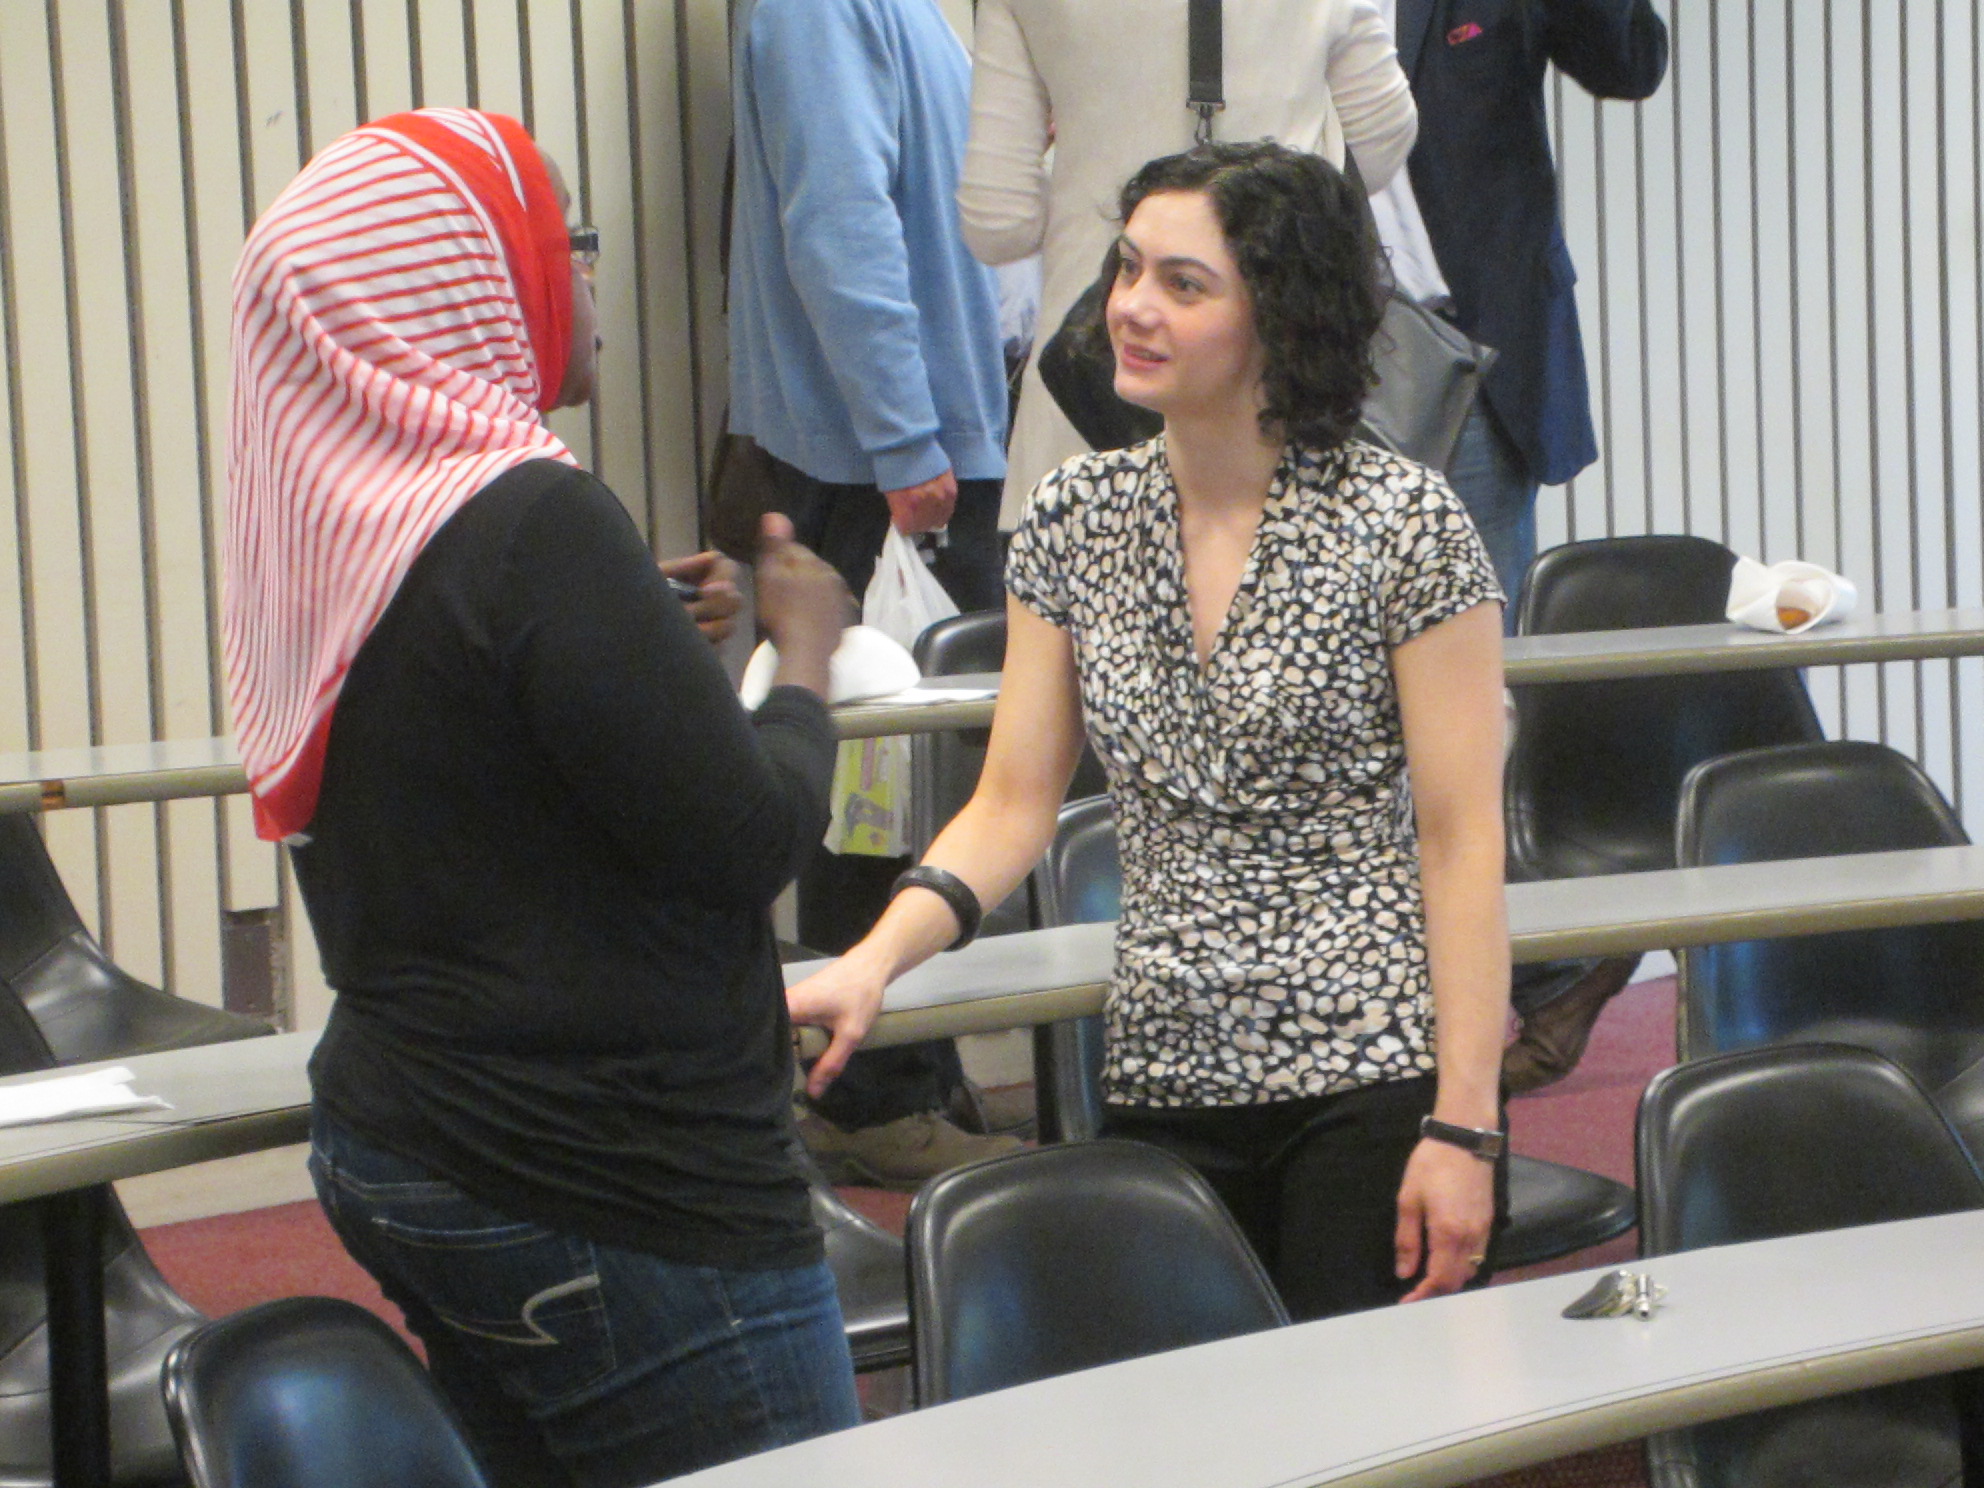 Susan Farbstein stands talking to a student wearing a hijab in a classroom.